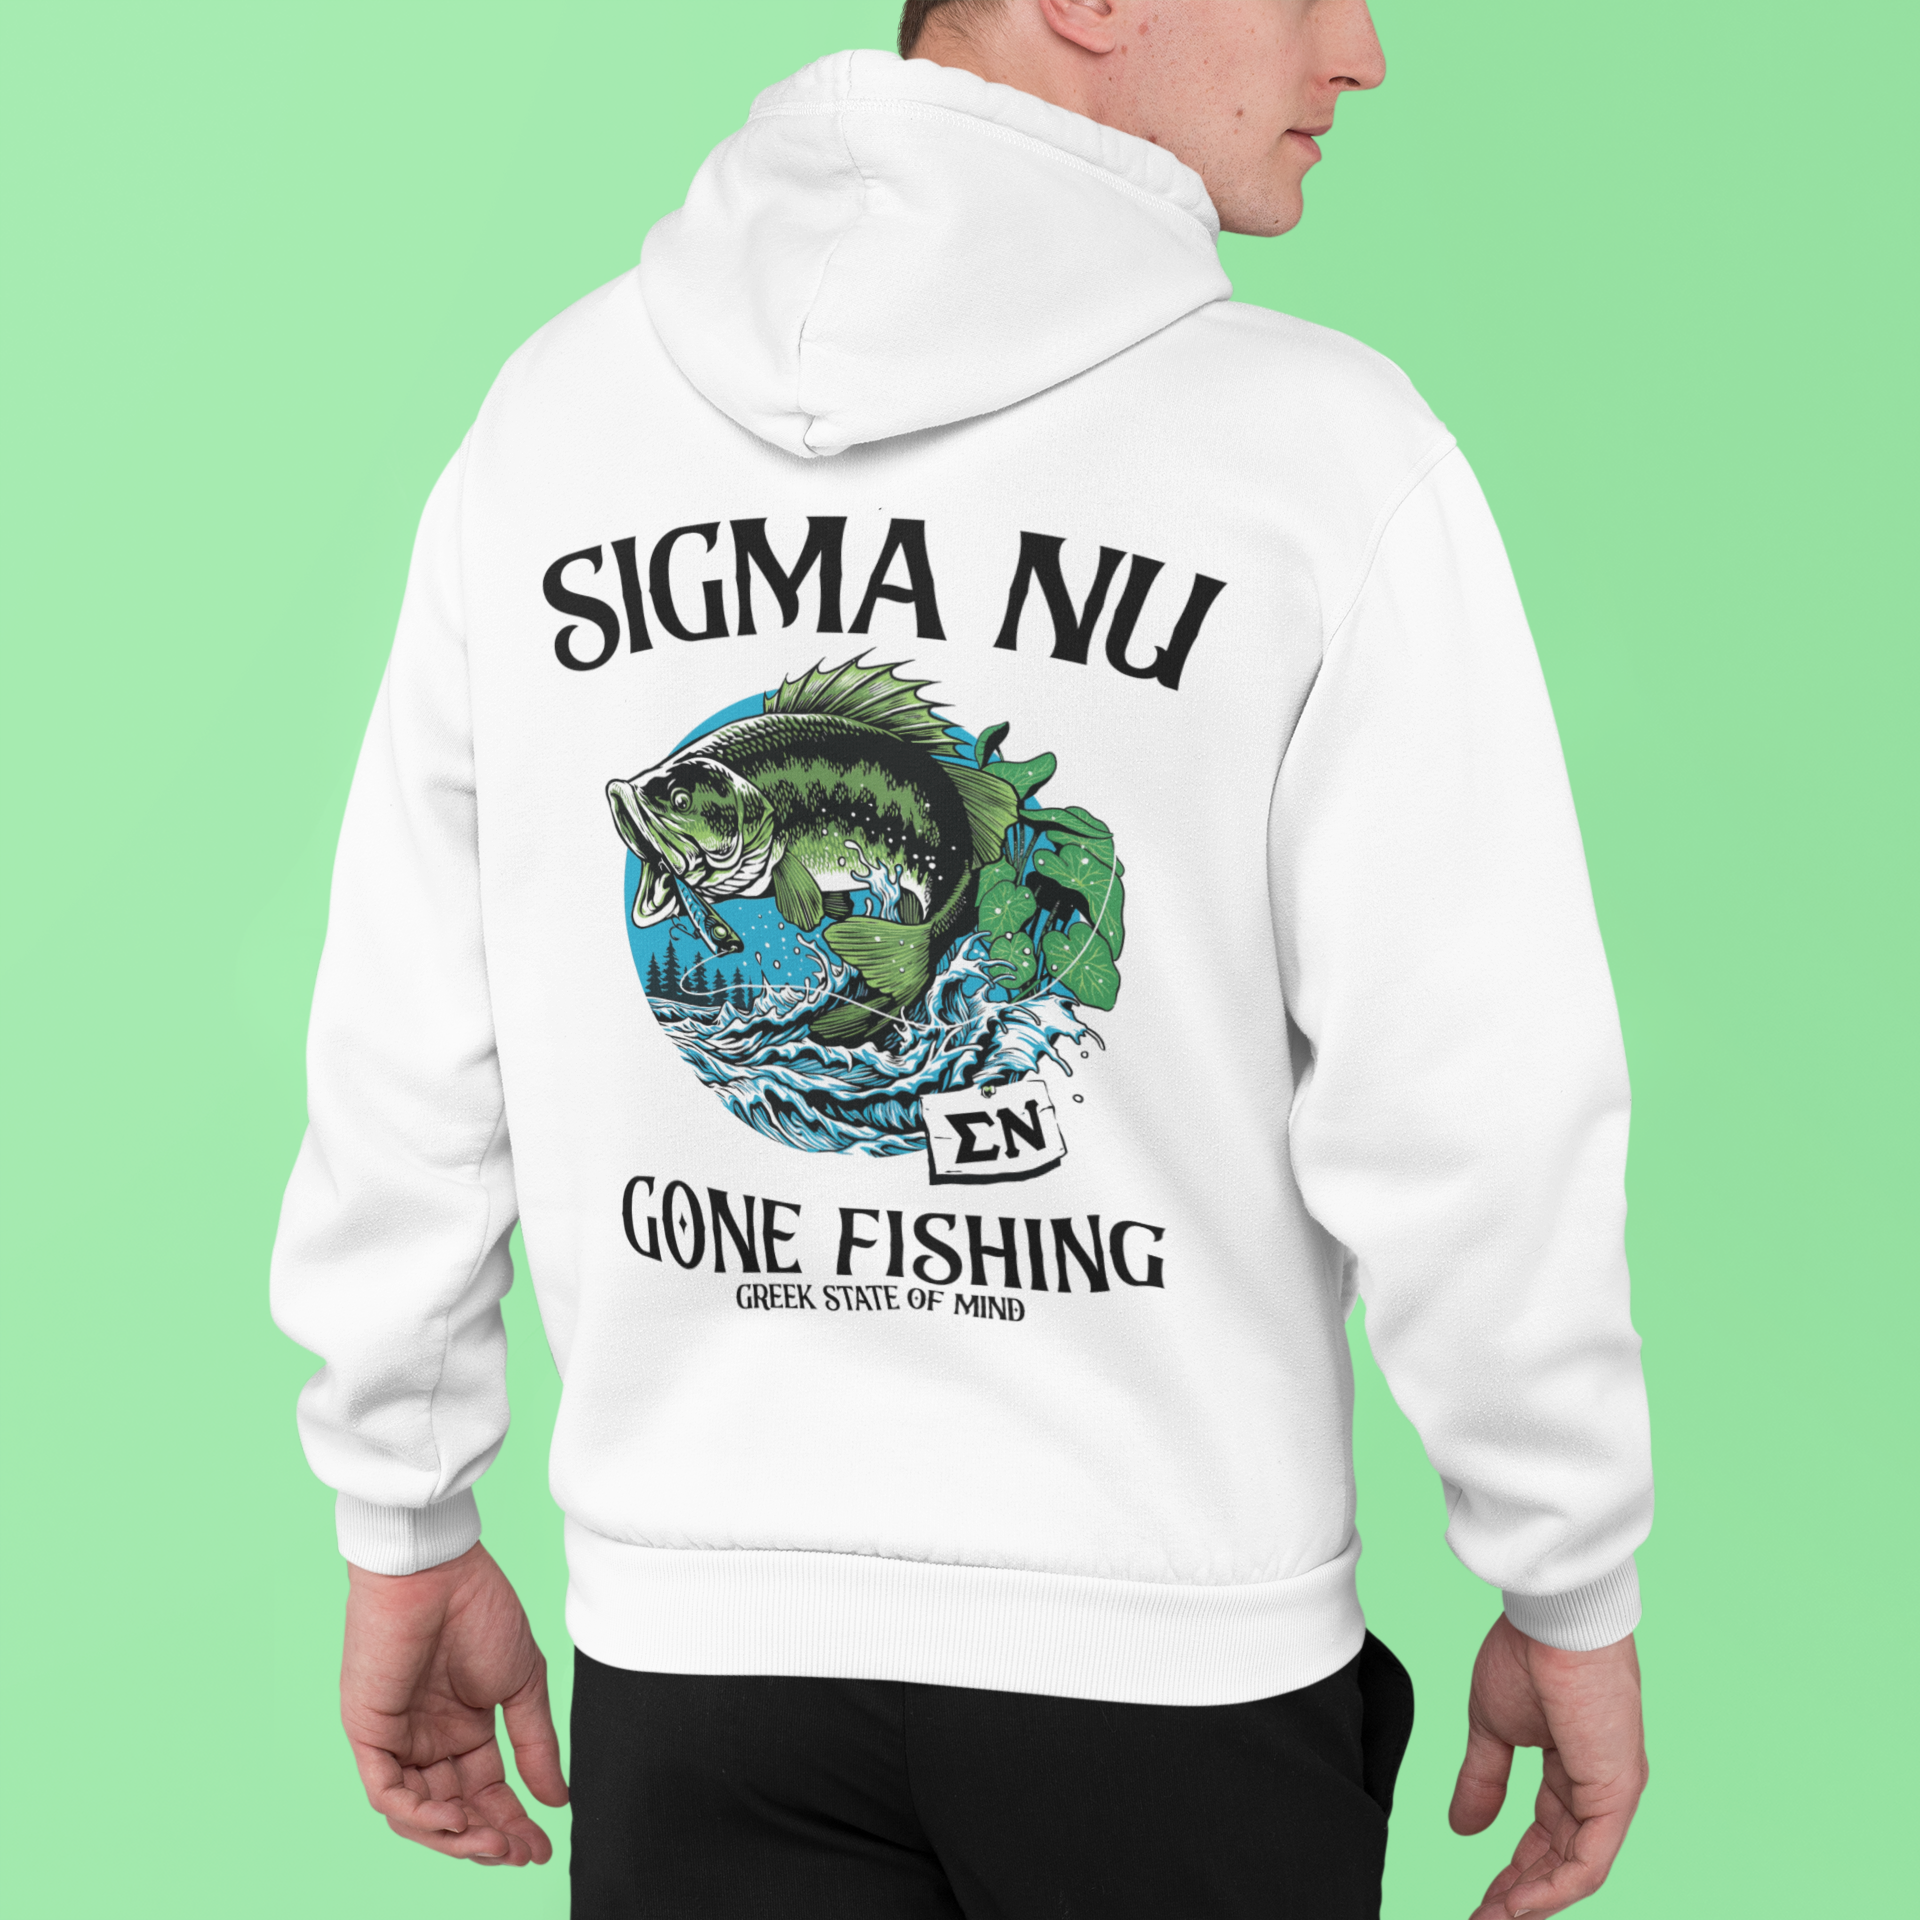 Sigma Nu Graphic Hoodie | Gone Fishing | Sigma Nu Clothing, Apparel and Merchandise back model 